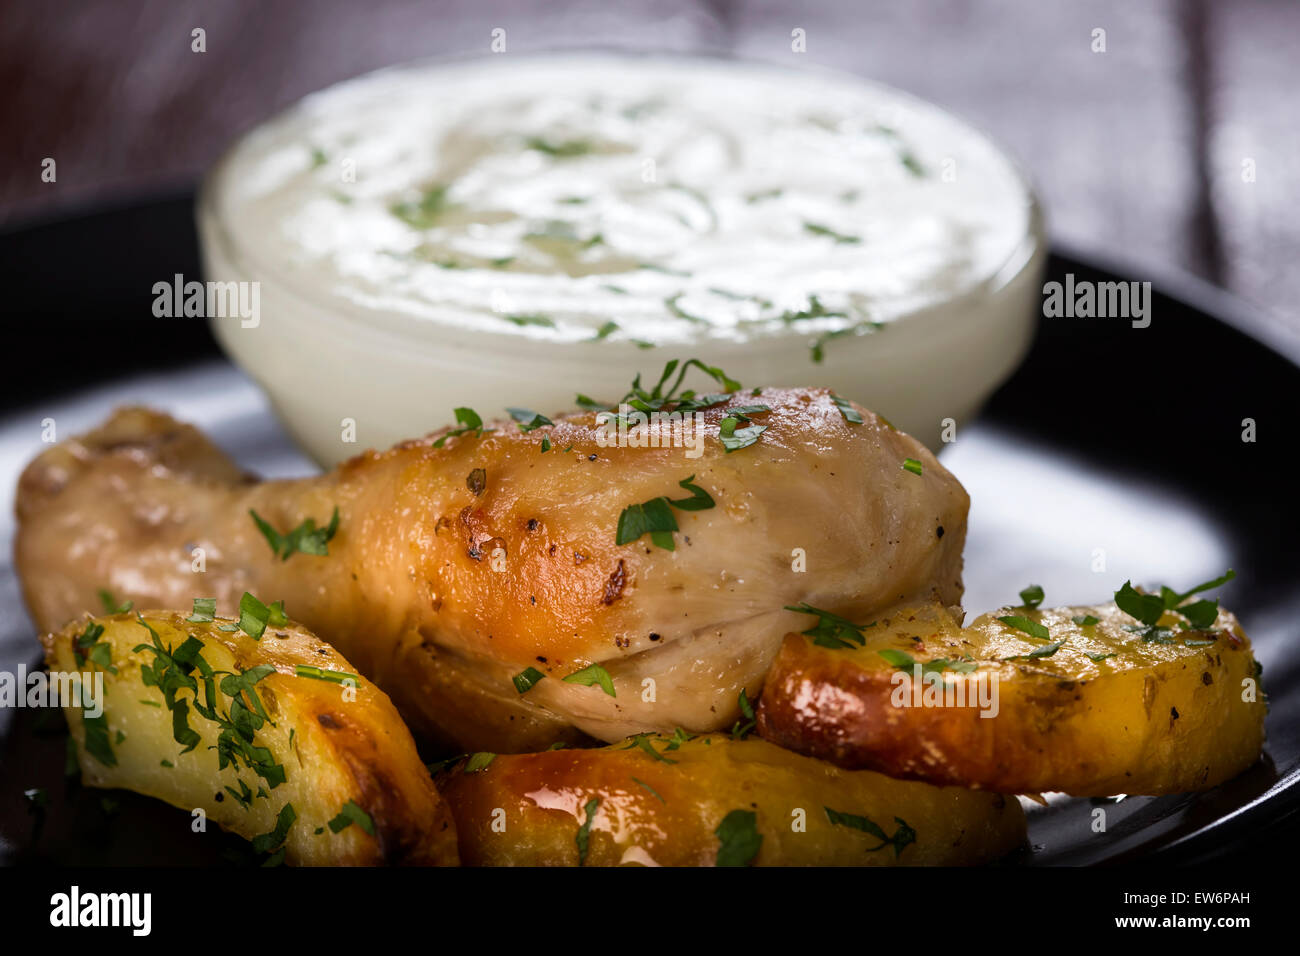 Baked potatoes with roasted chicken drumstick on dark plate Stock Photo